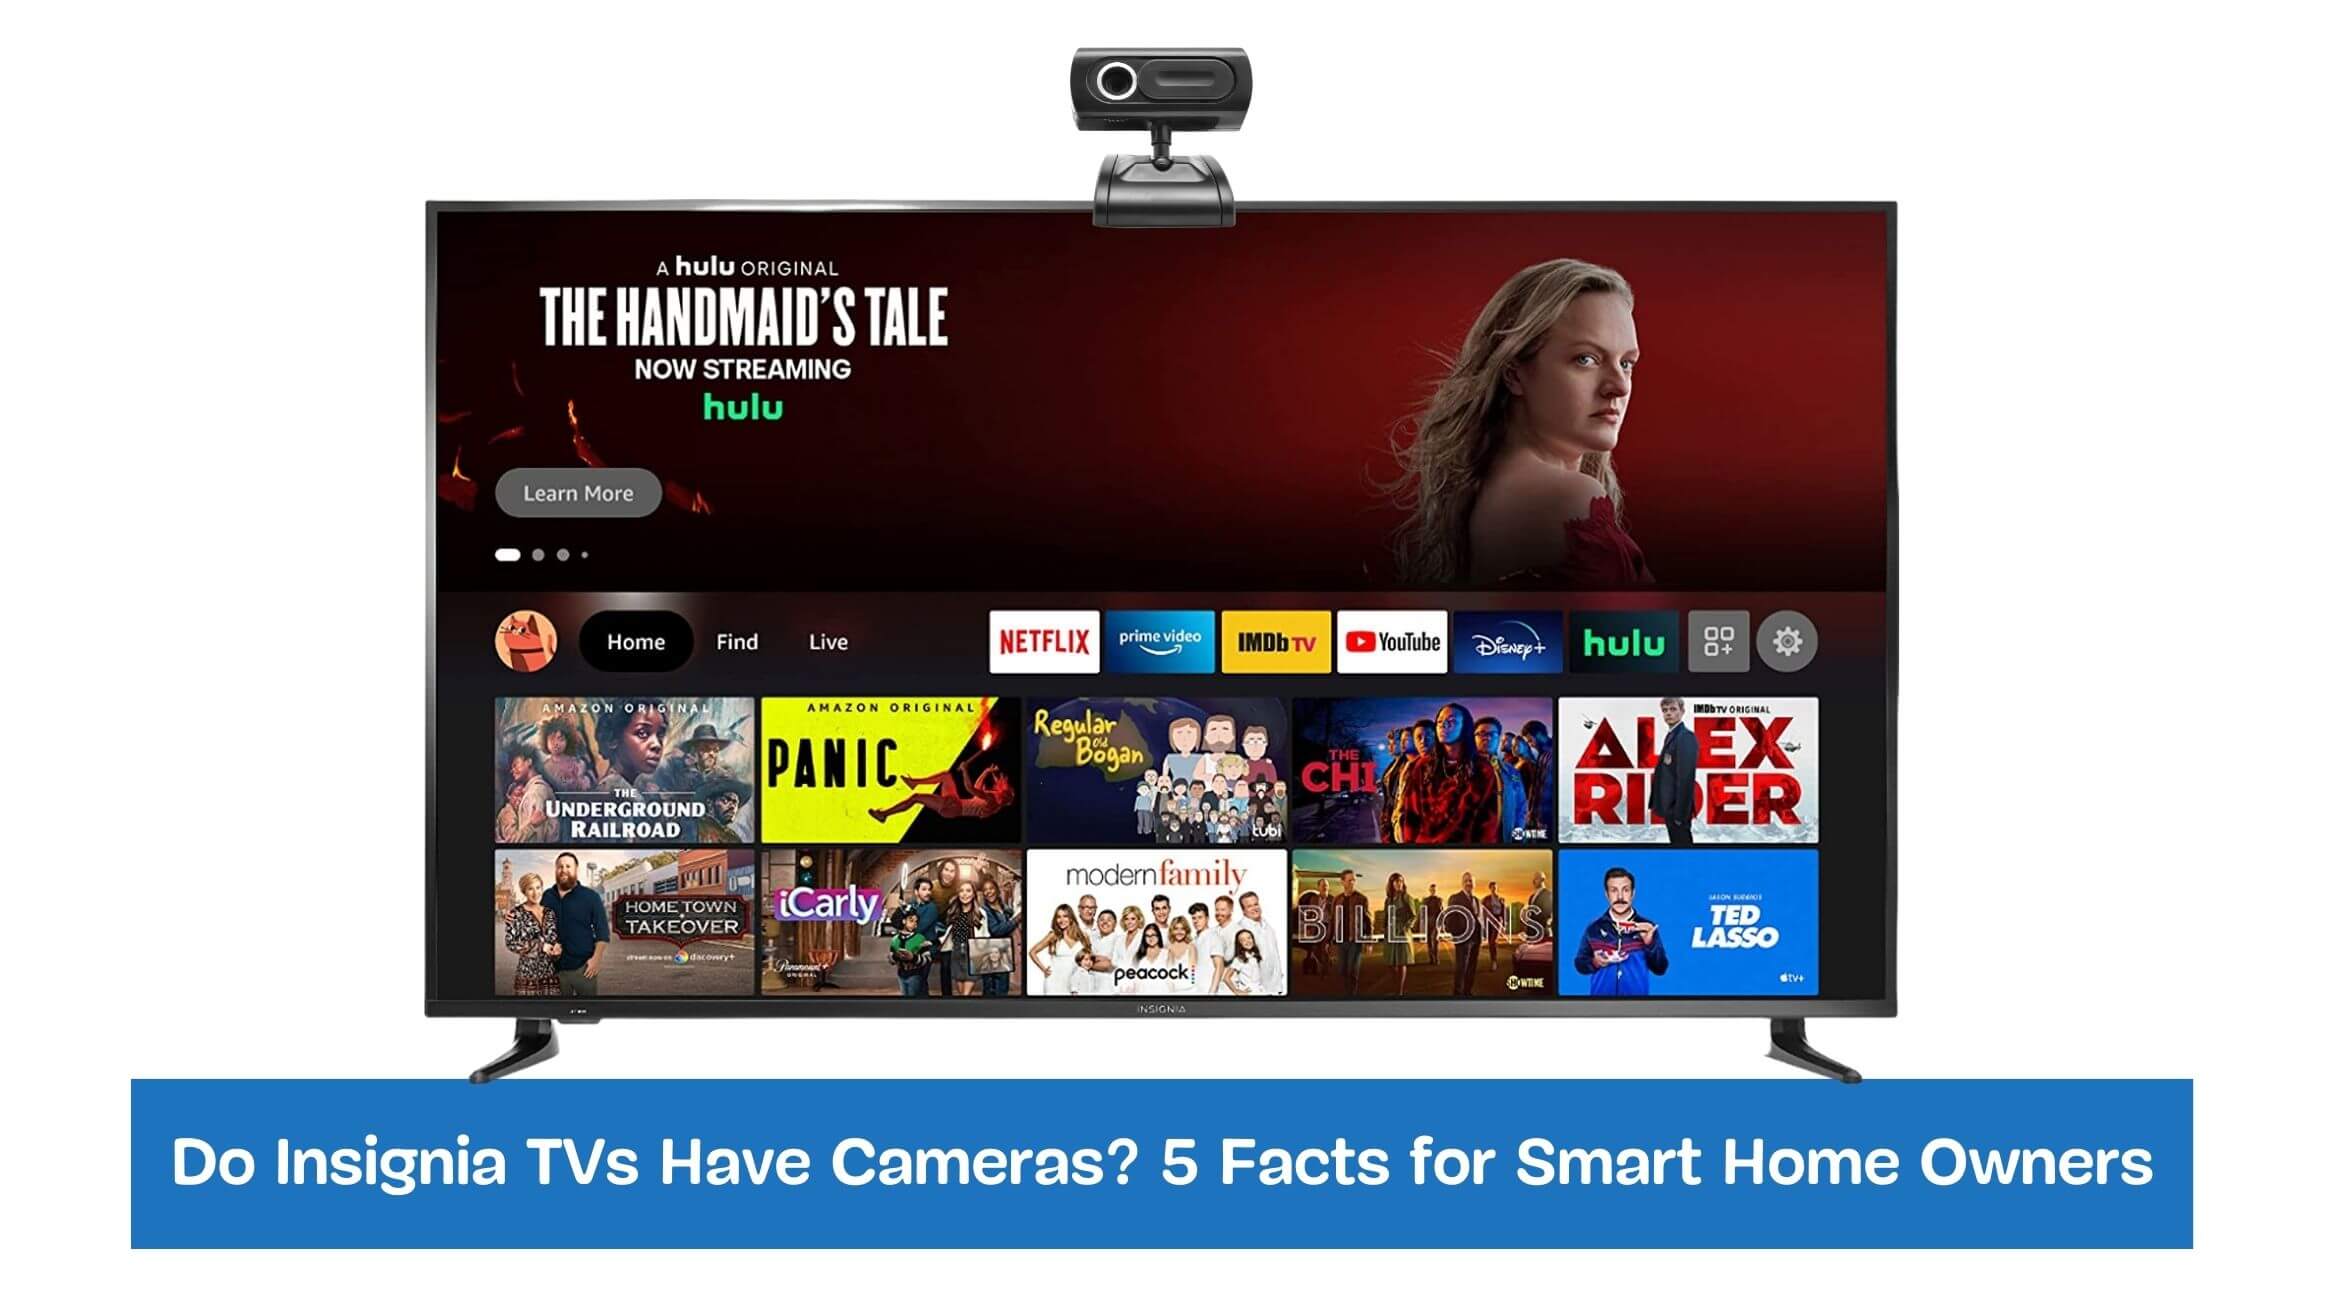 Do Insignia TVs Have Cameras? 5 Facts for Smart Home Owners